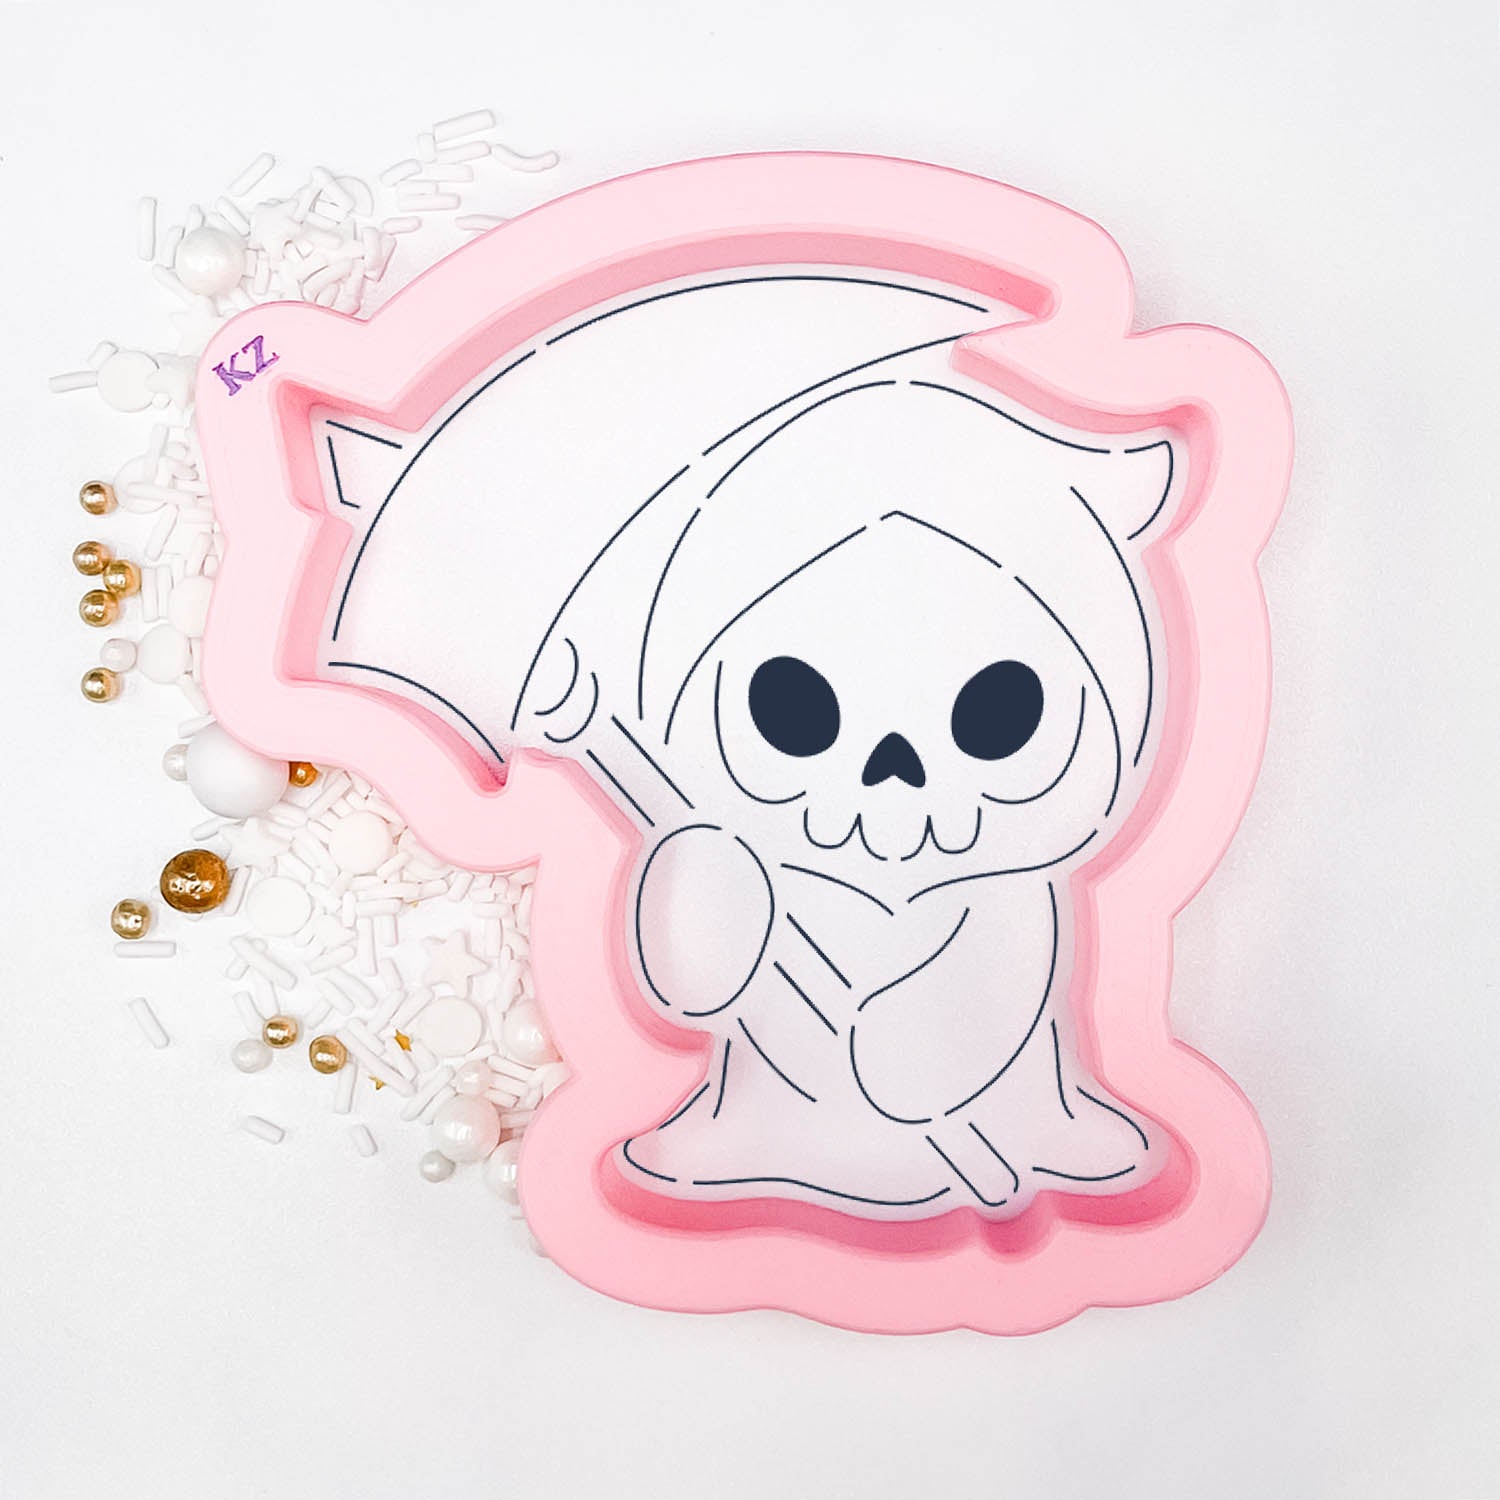 cookie cutter in the shape of the grimm reaper